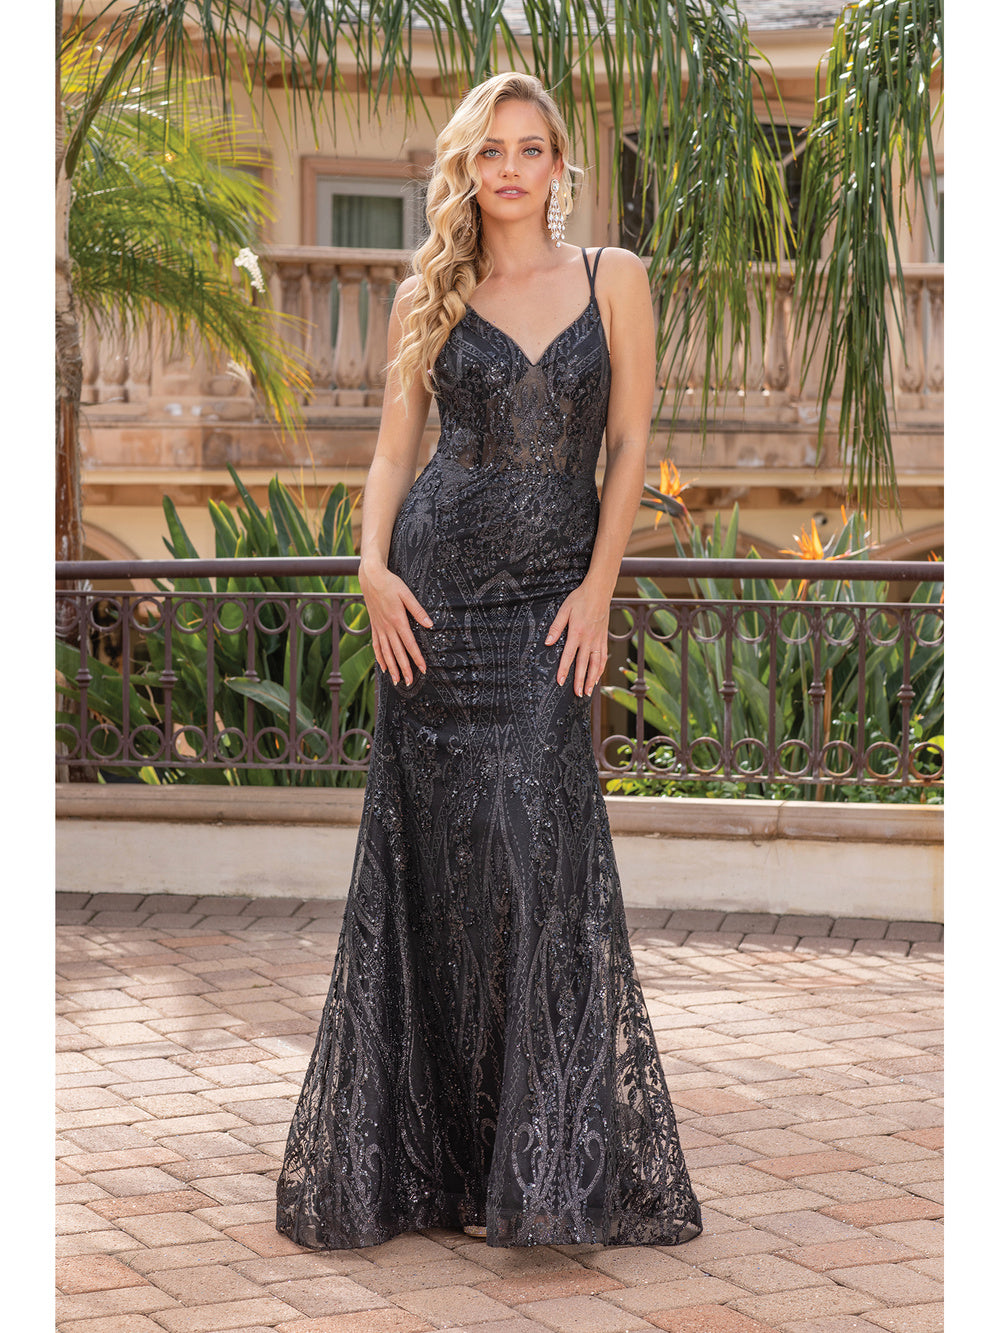 DQ 4336 - Glitter Pattern fit & Flare Prom Gown with Sheer Boned Bodice & Corset Back Prom Dress Dancing Queen XS BLACK 